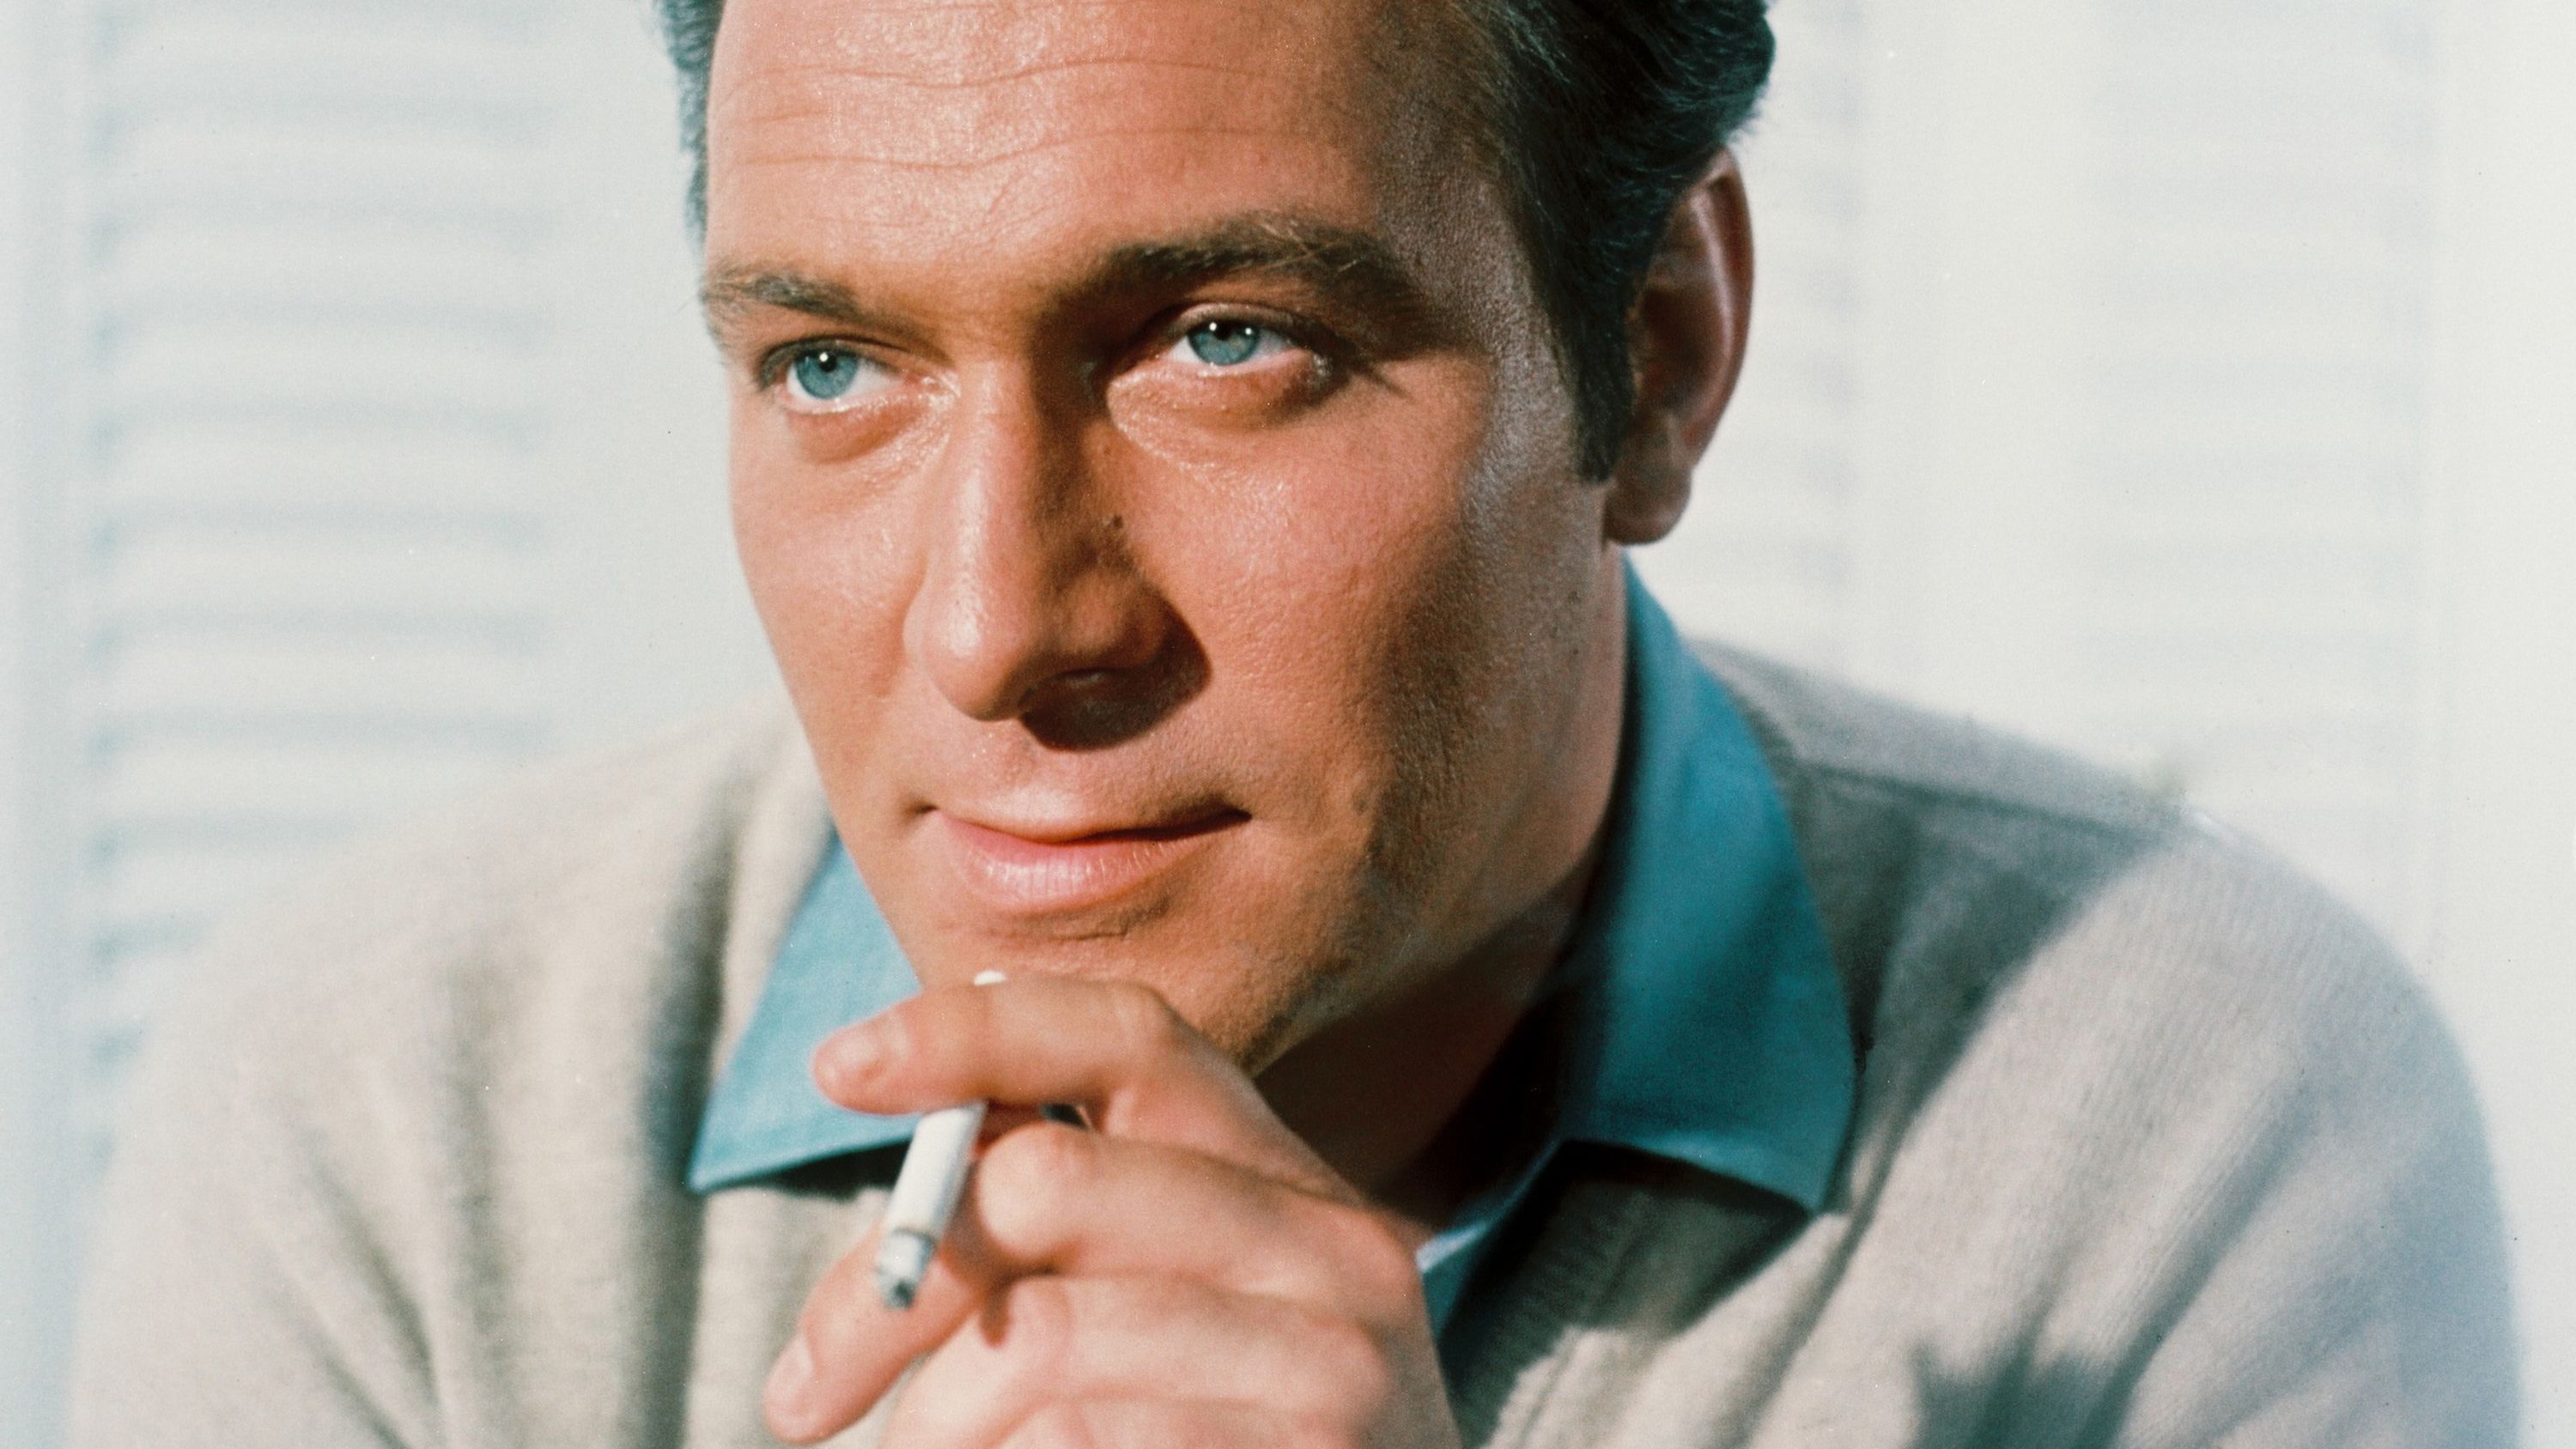 Christopher Plummer smokes a cigarette in this studio portrait circa 1955. The trained Shakespearean actor was born in Toronto but grew up in Quebec.